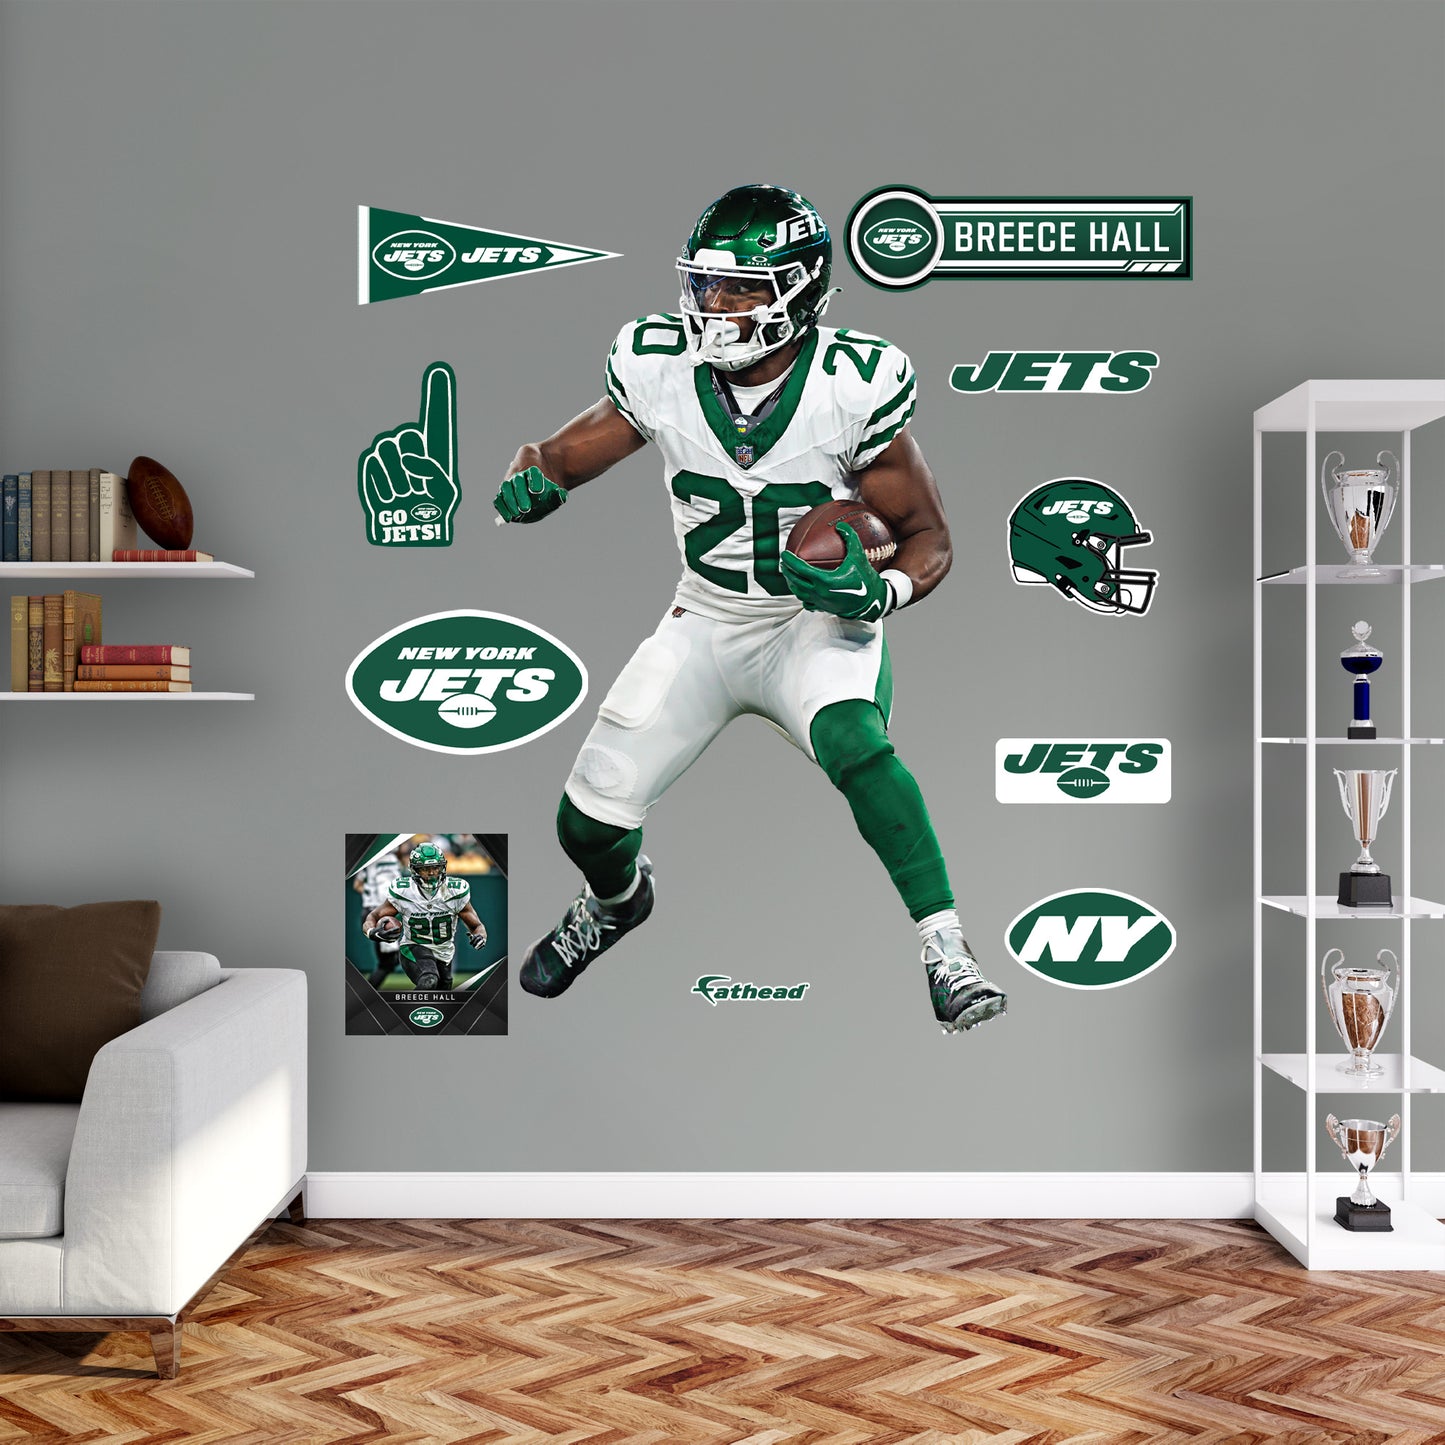 New York Jets: Breece Hall Throwback        - Officially Licensed NFL Removable     Adhesive Decal